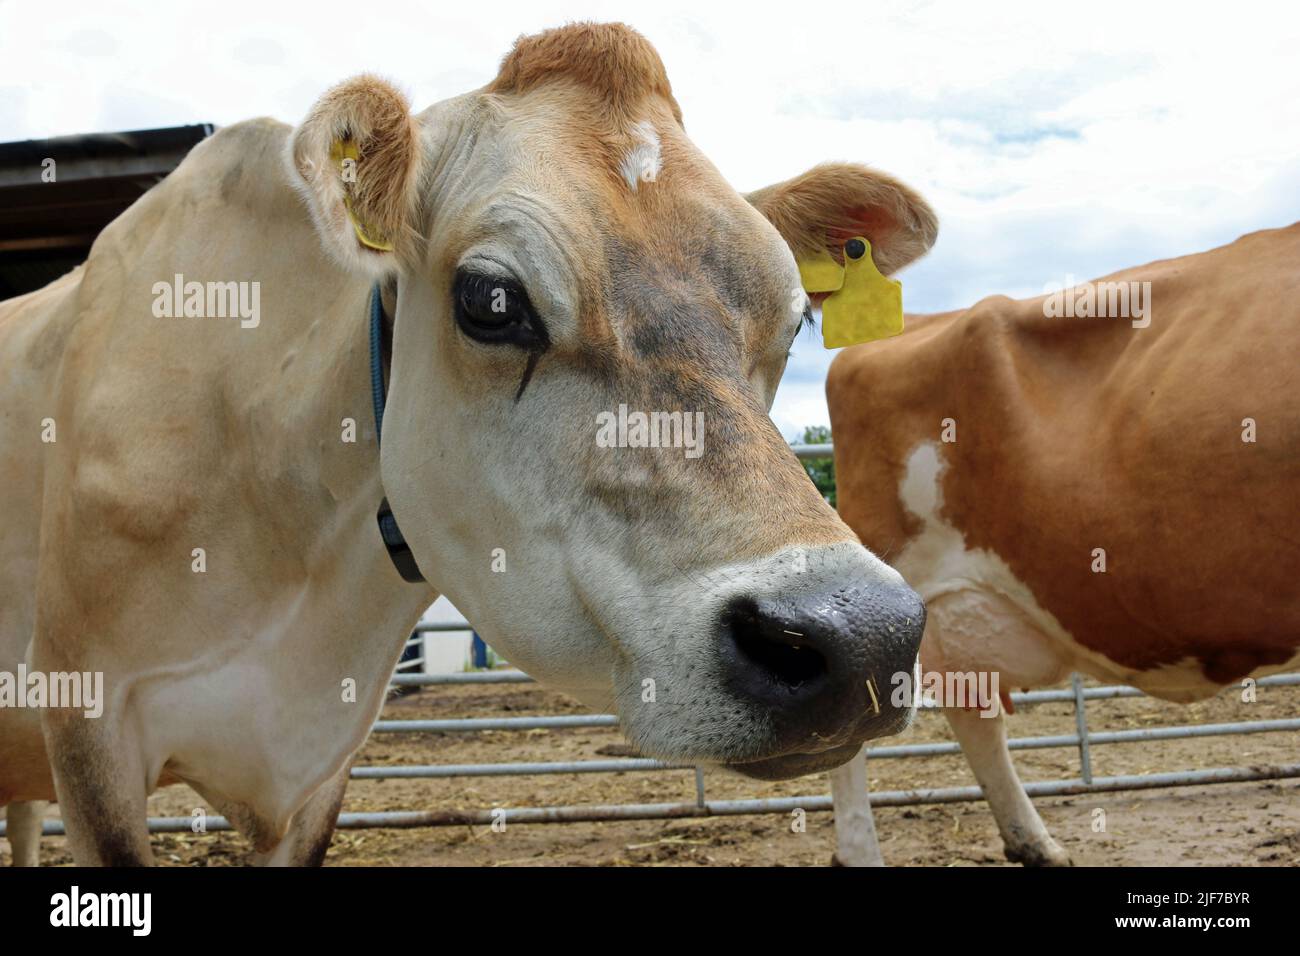 Light brown Guernsey cow head and shoulders in a farmyard with another cow, farm buildings and a metal fence in the background. Stock Photo